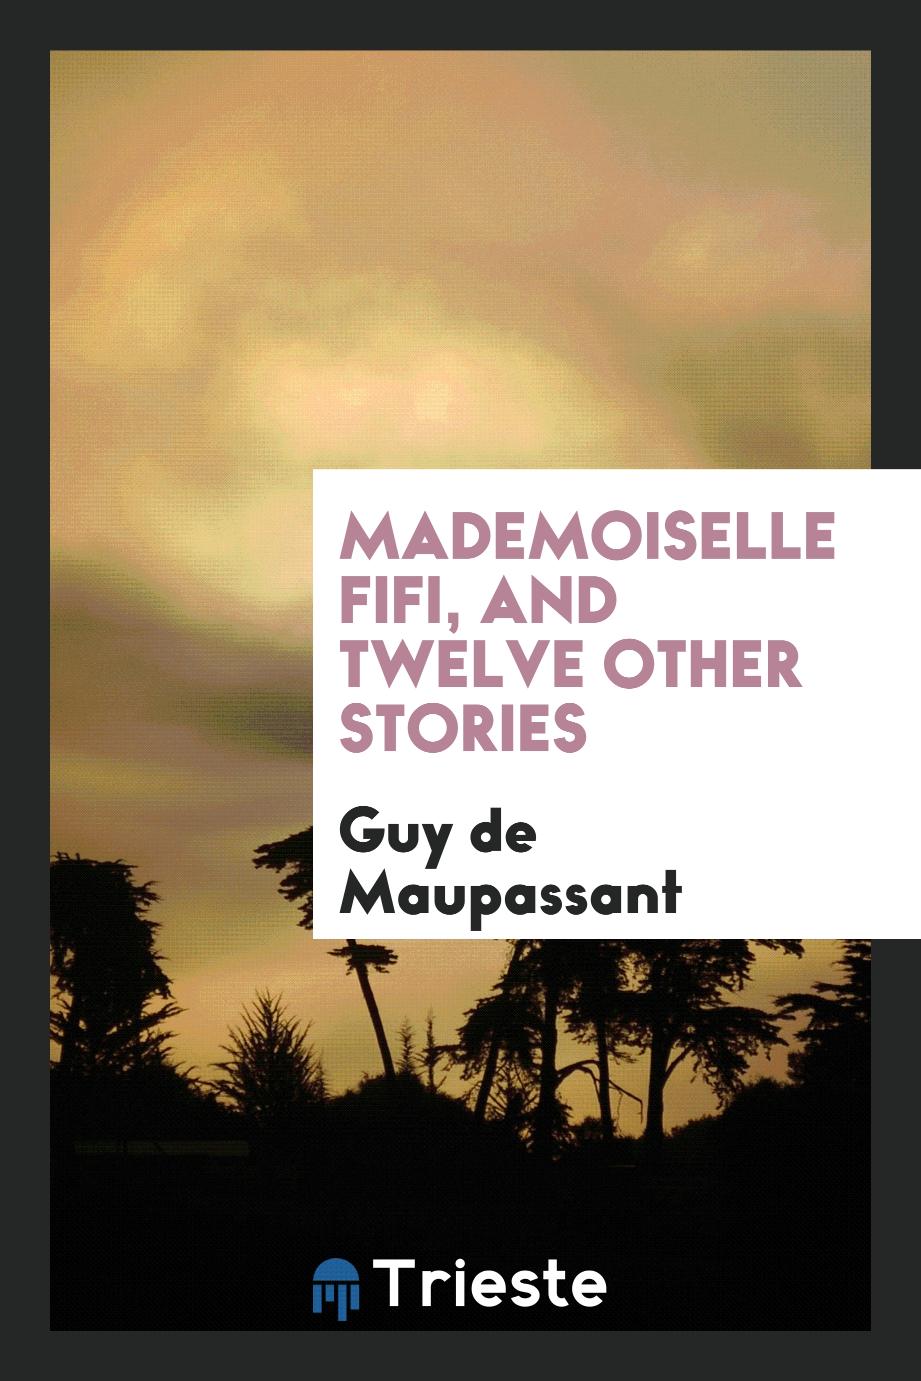 Mademoiselle Fifi, and twelve other stories